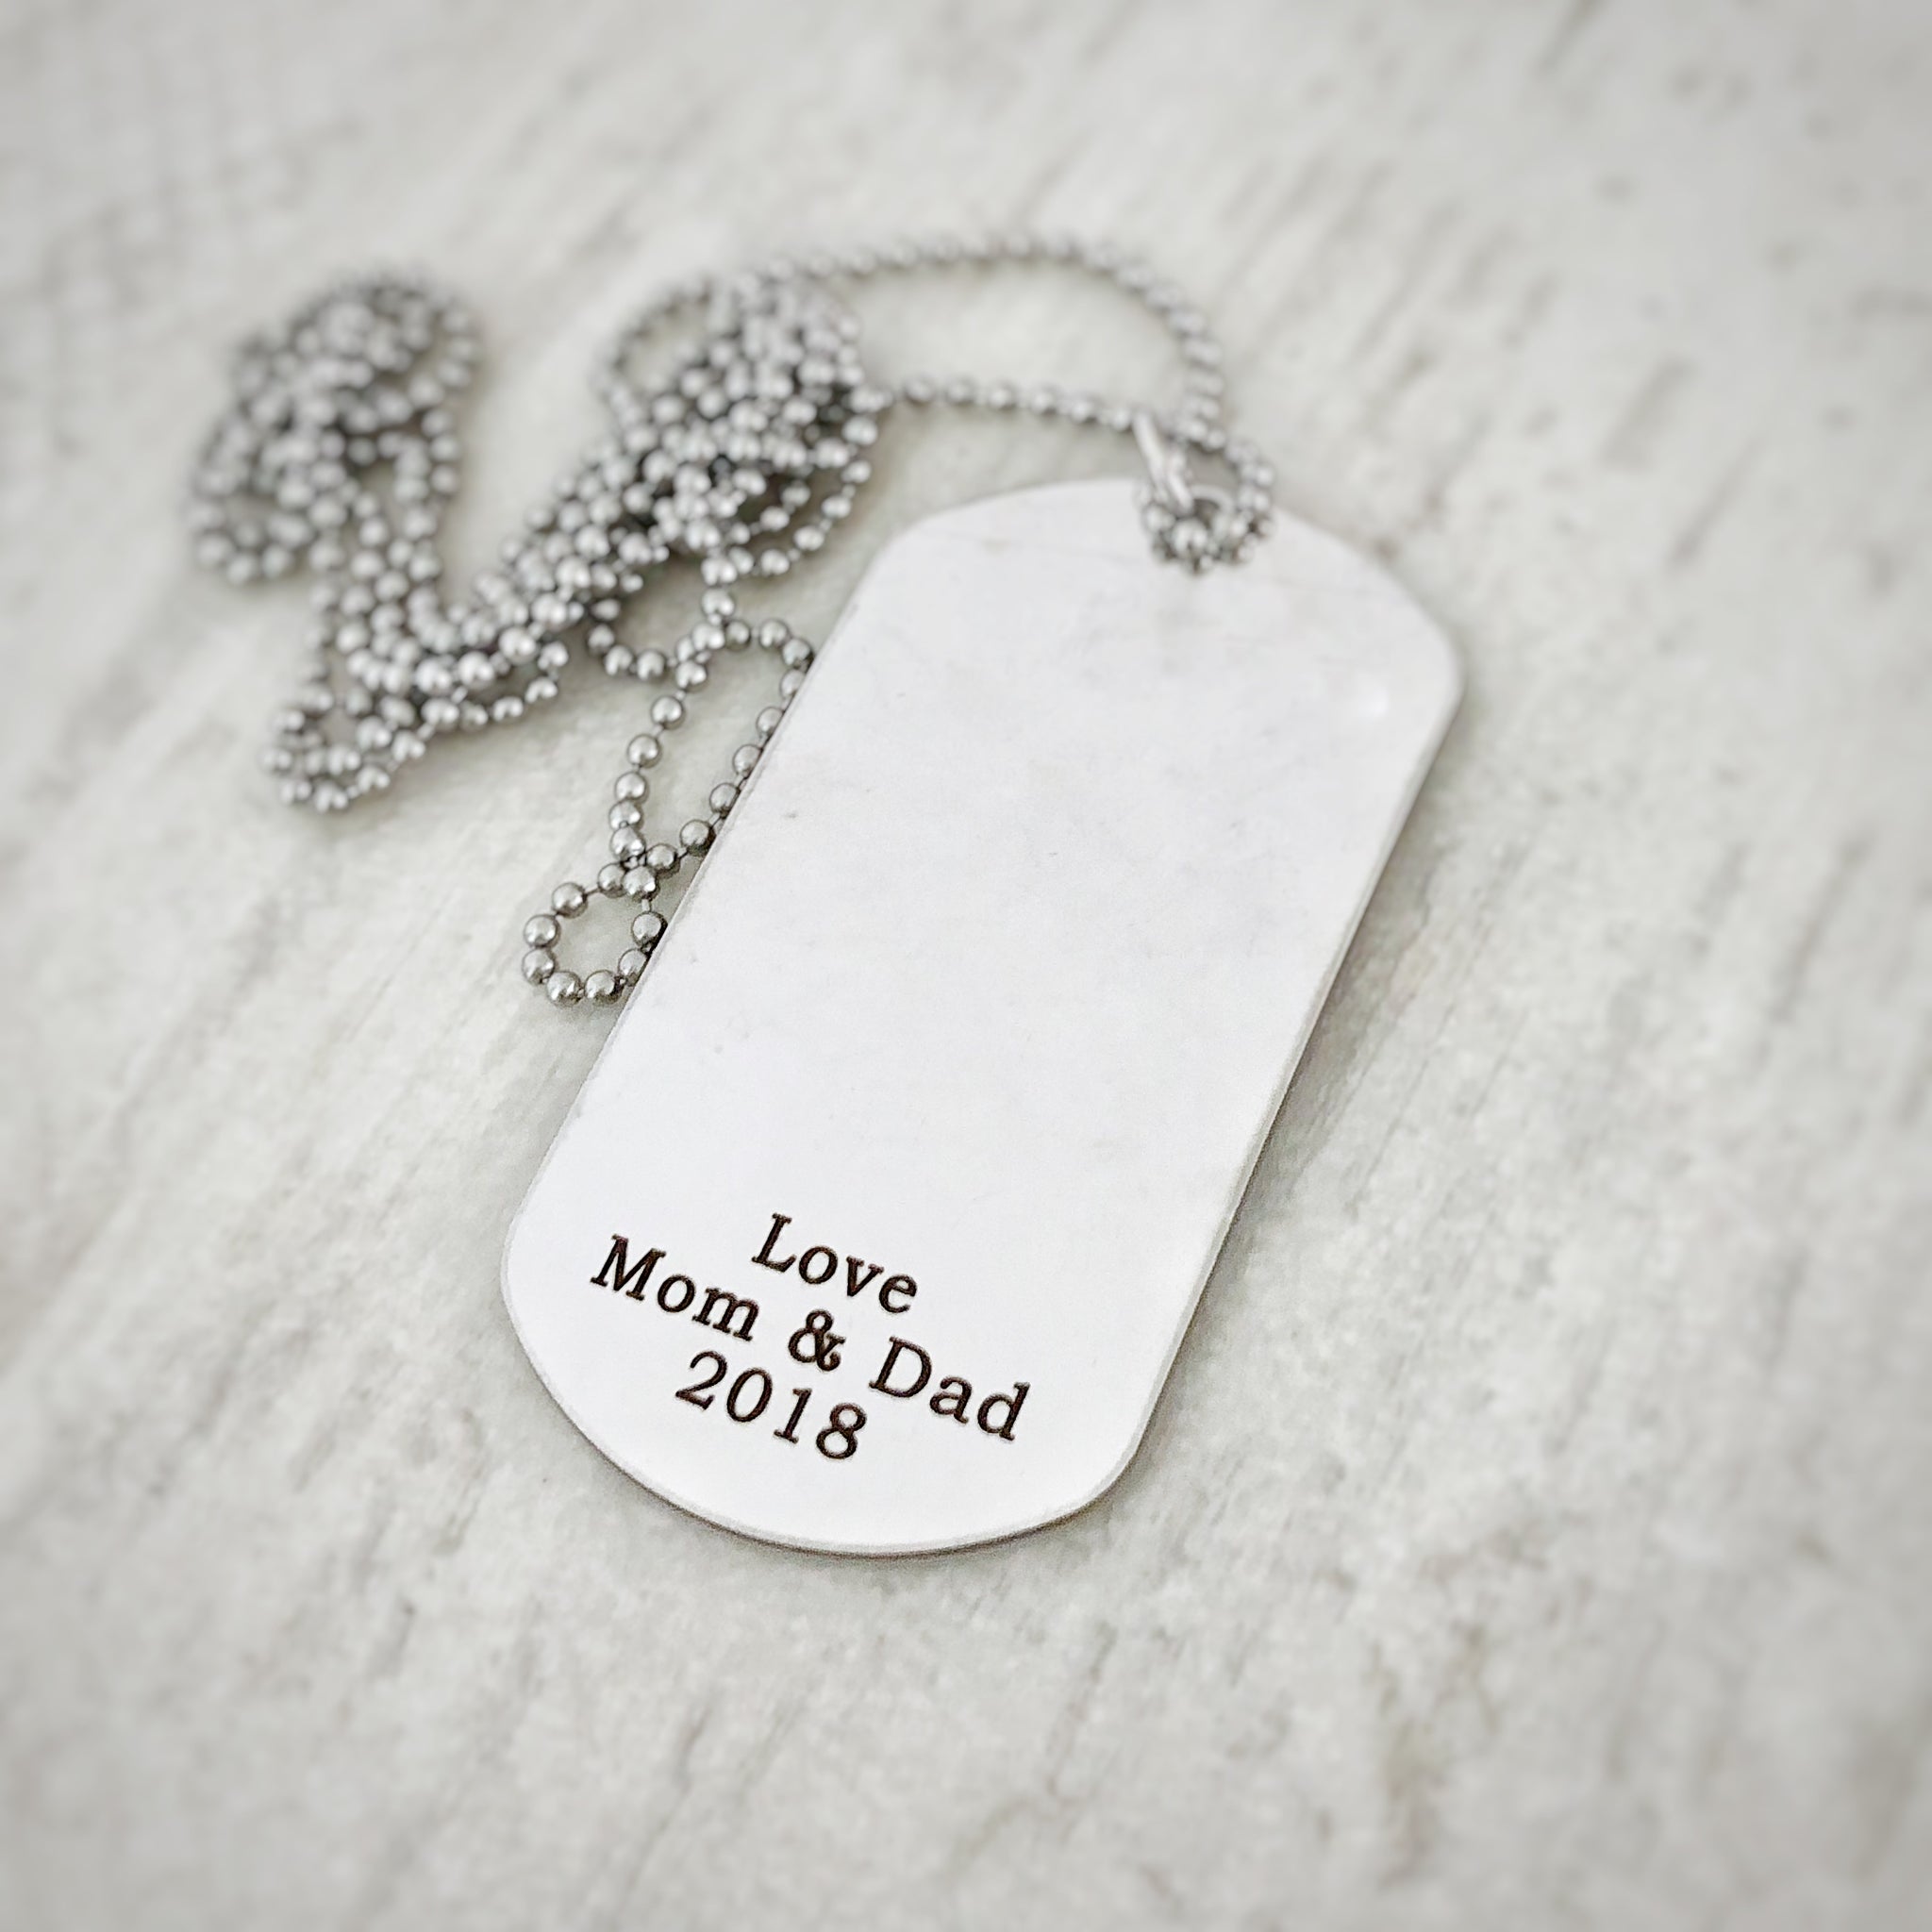 Mom To Son Christmas Gift Engraved Dog Tag Keychain